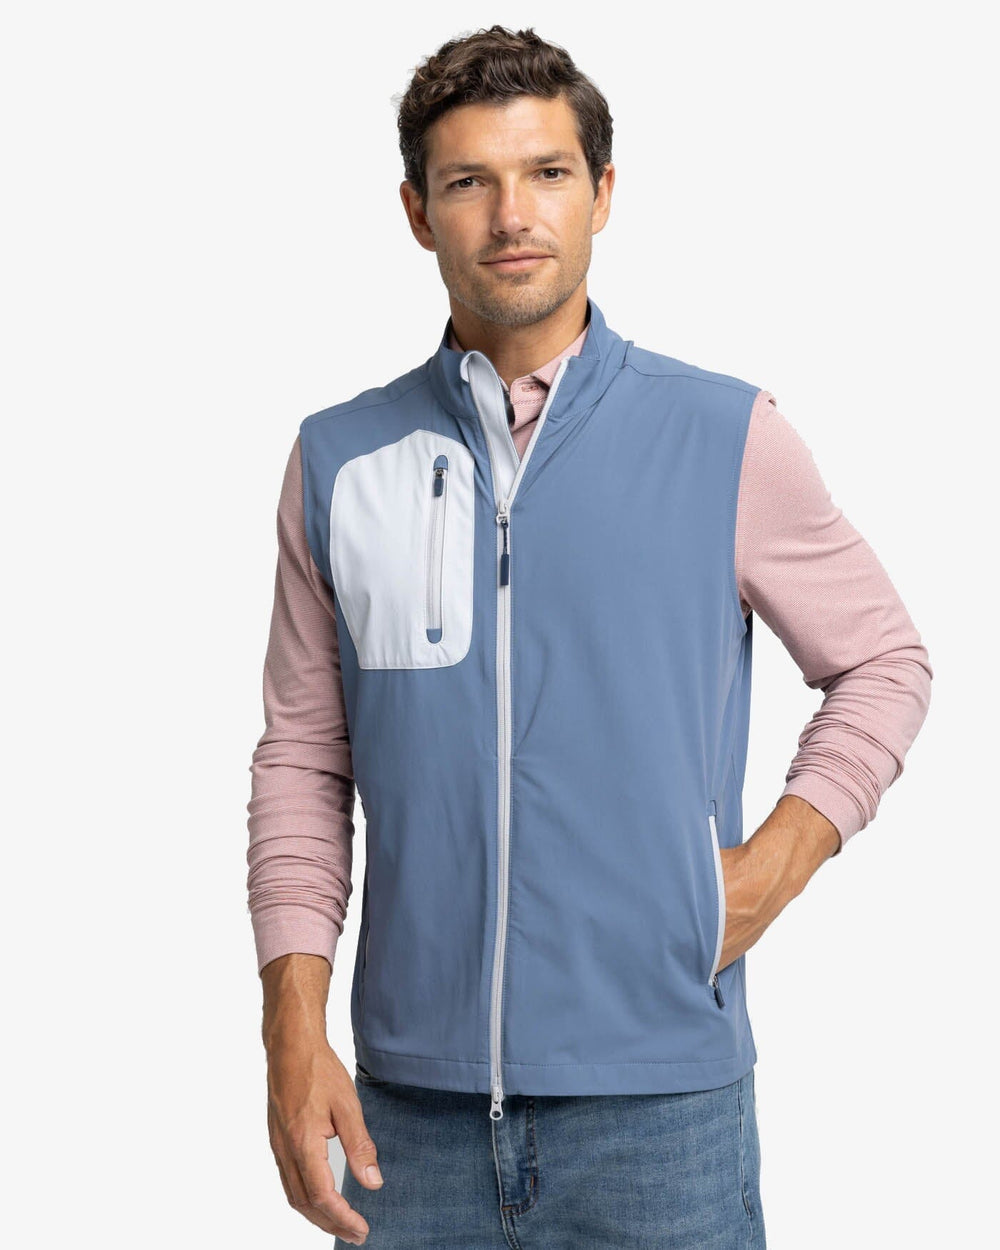 The front view of the Southern Tide Bowline Performance Vest by Southern Tide - Blue Haze